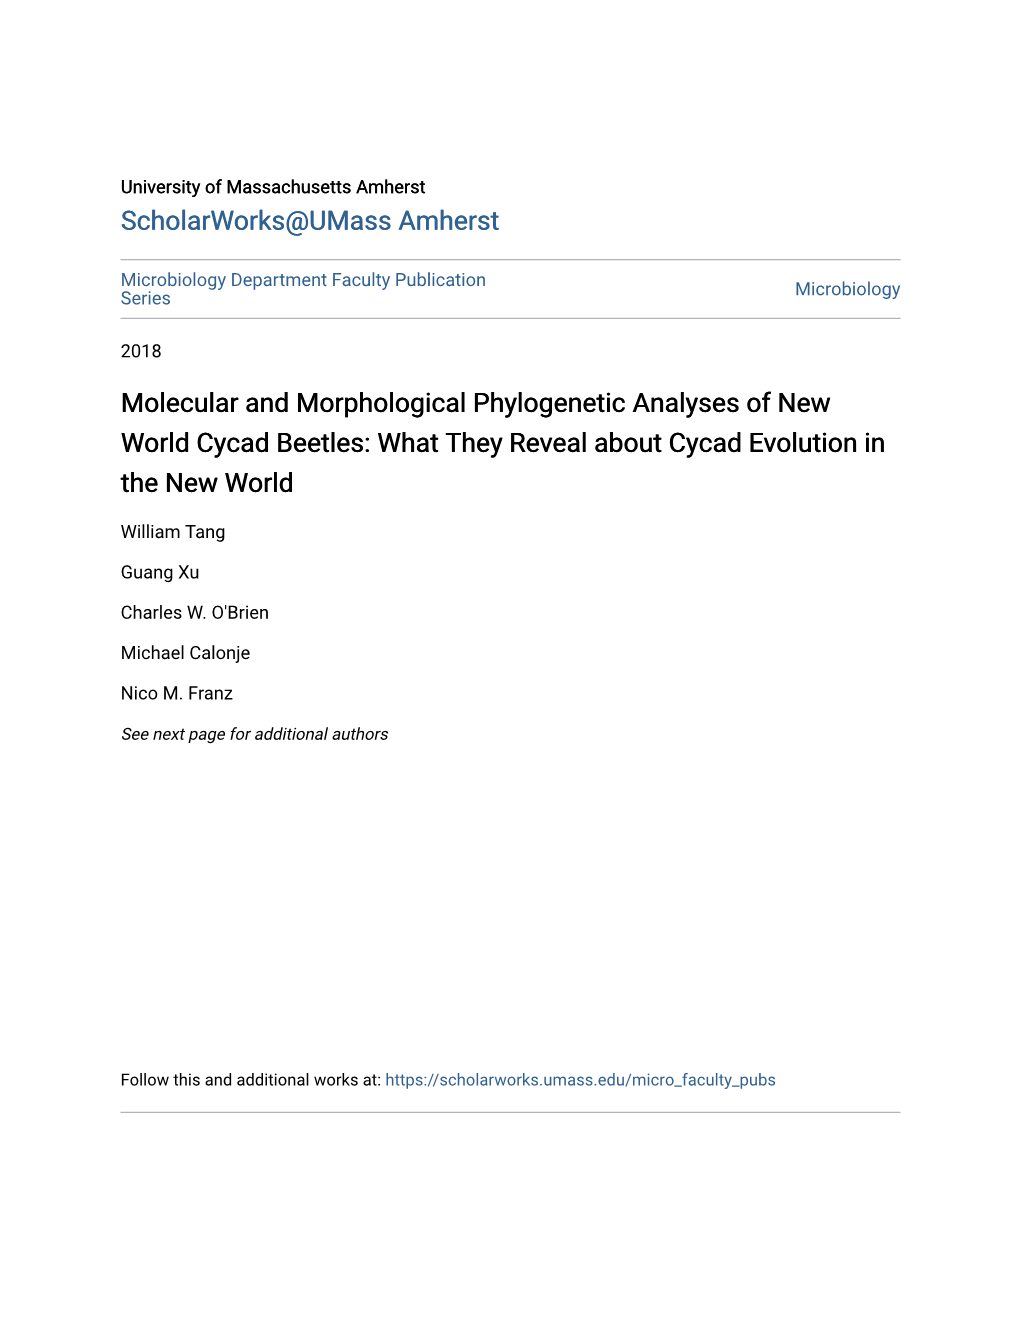 Molecular and Morphological Phylogenetic Analyses of New World Cycad Beetles: What They Reveal About Cycad Evolution in the New World